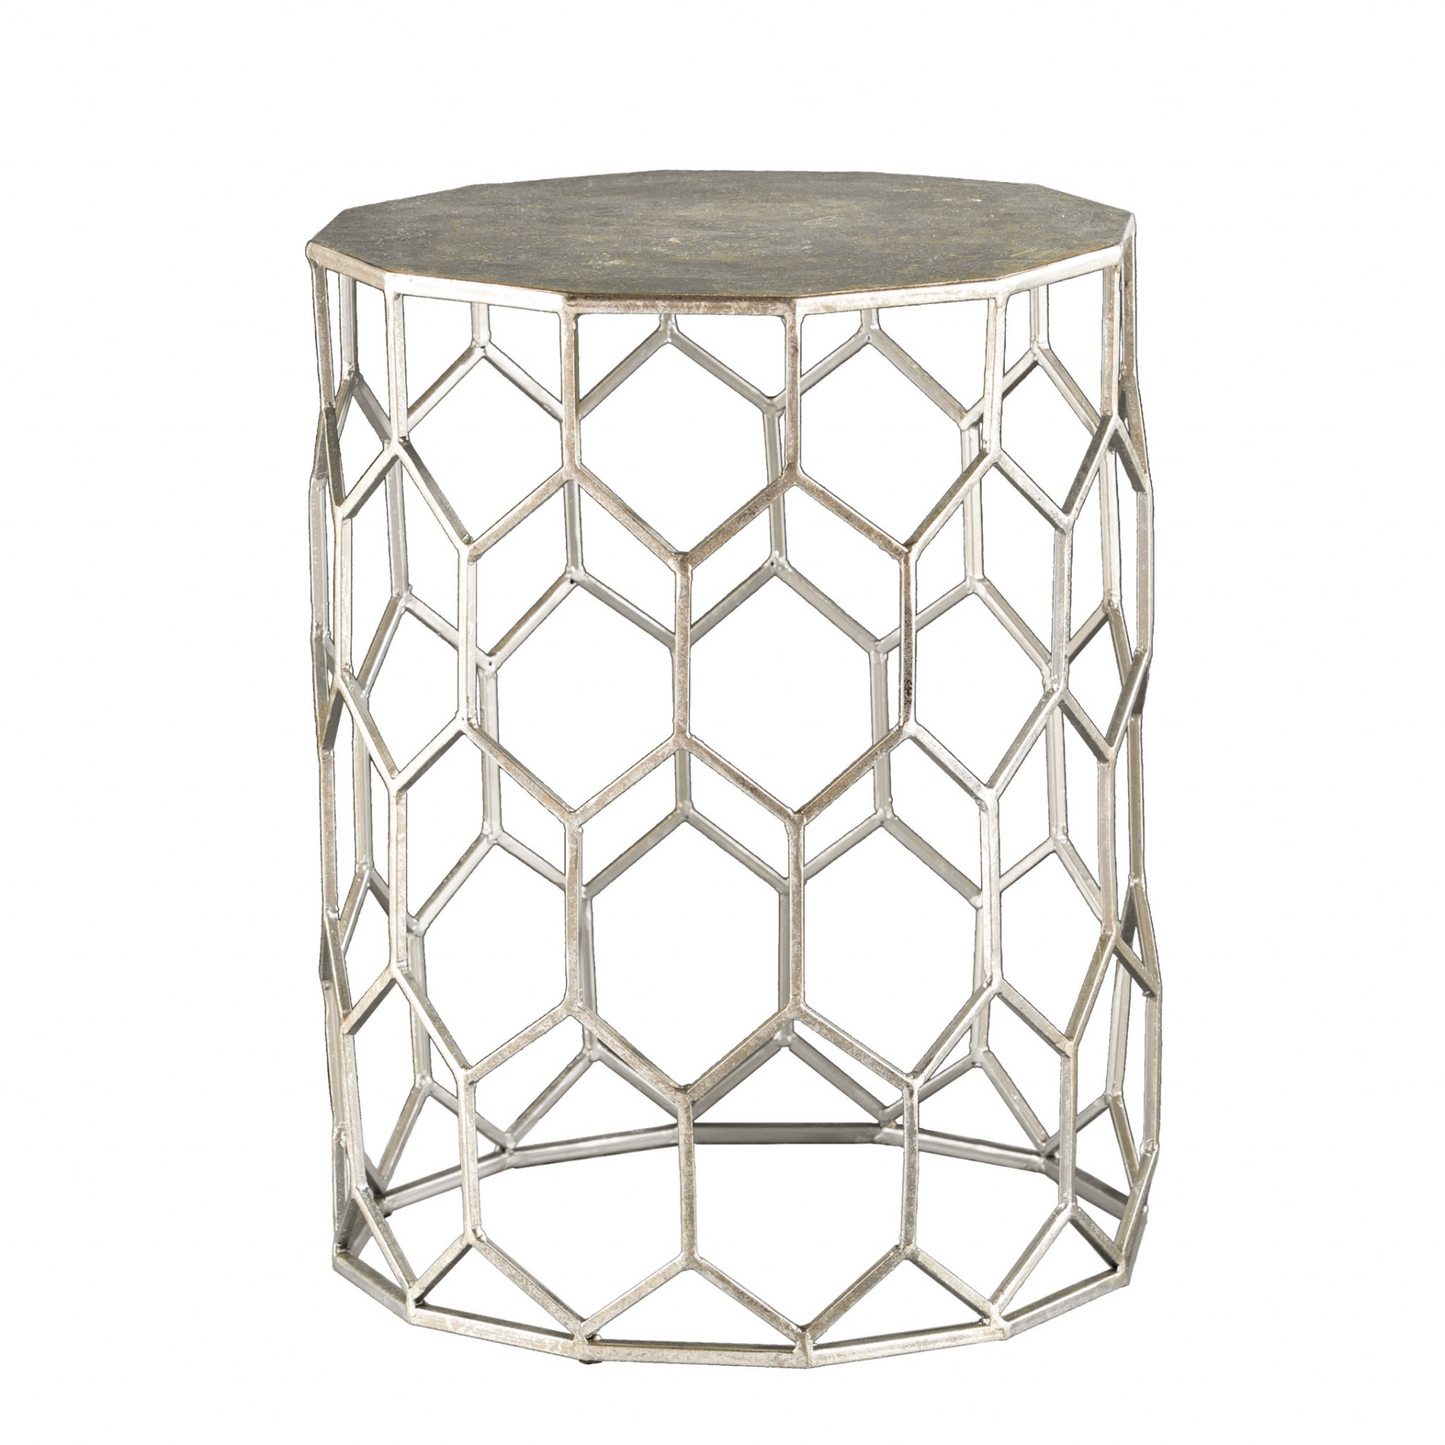 "18"" Antiqued Gold Honeycomb Hexagonal End Table"